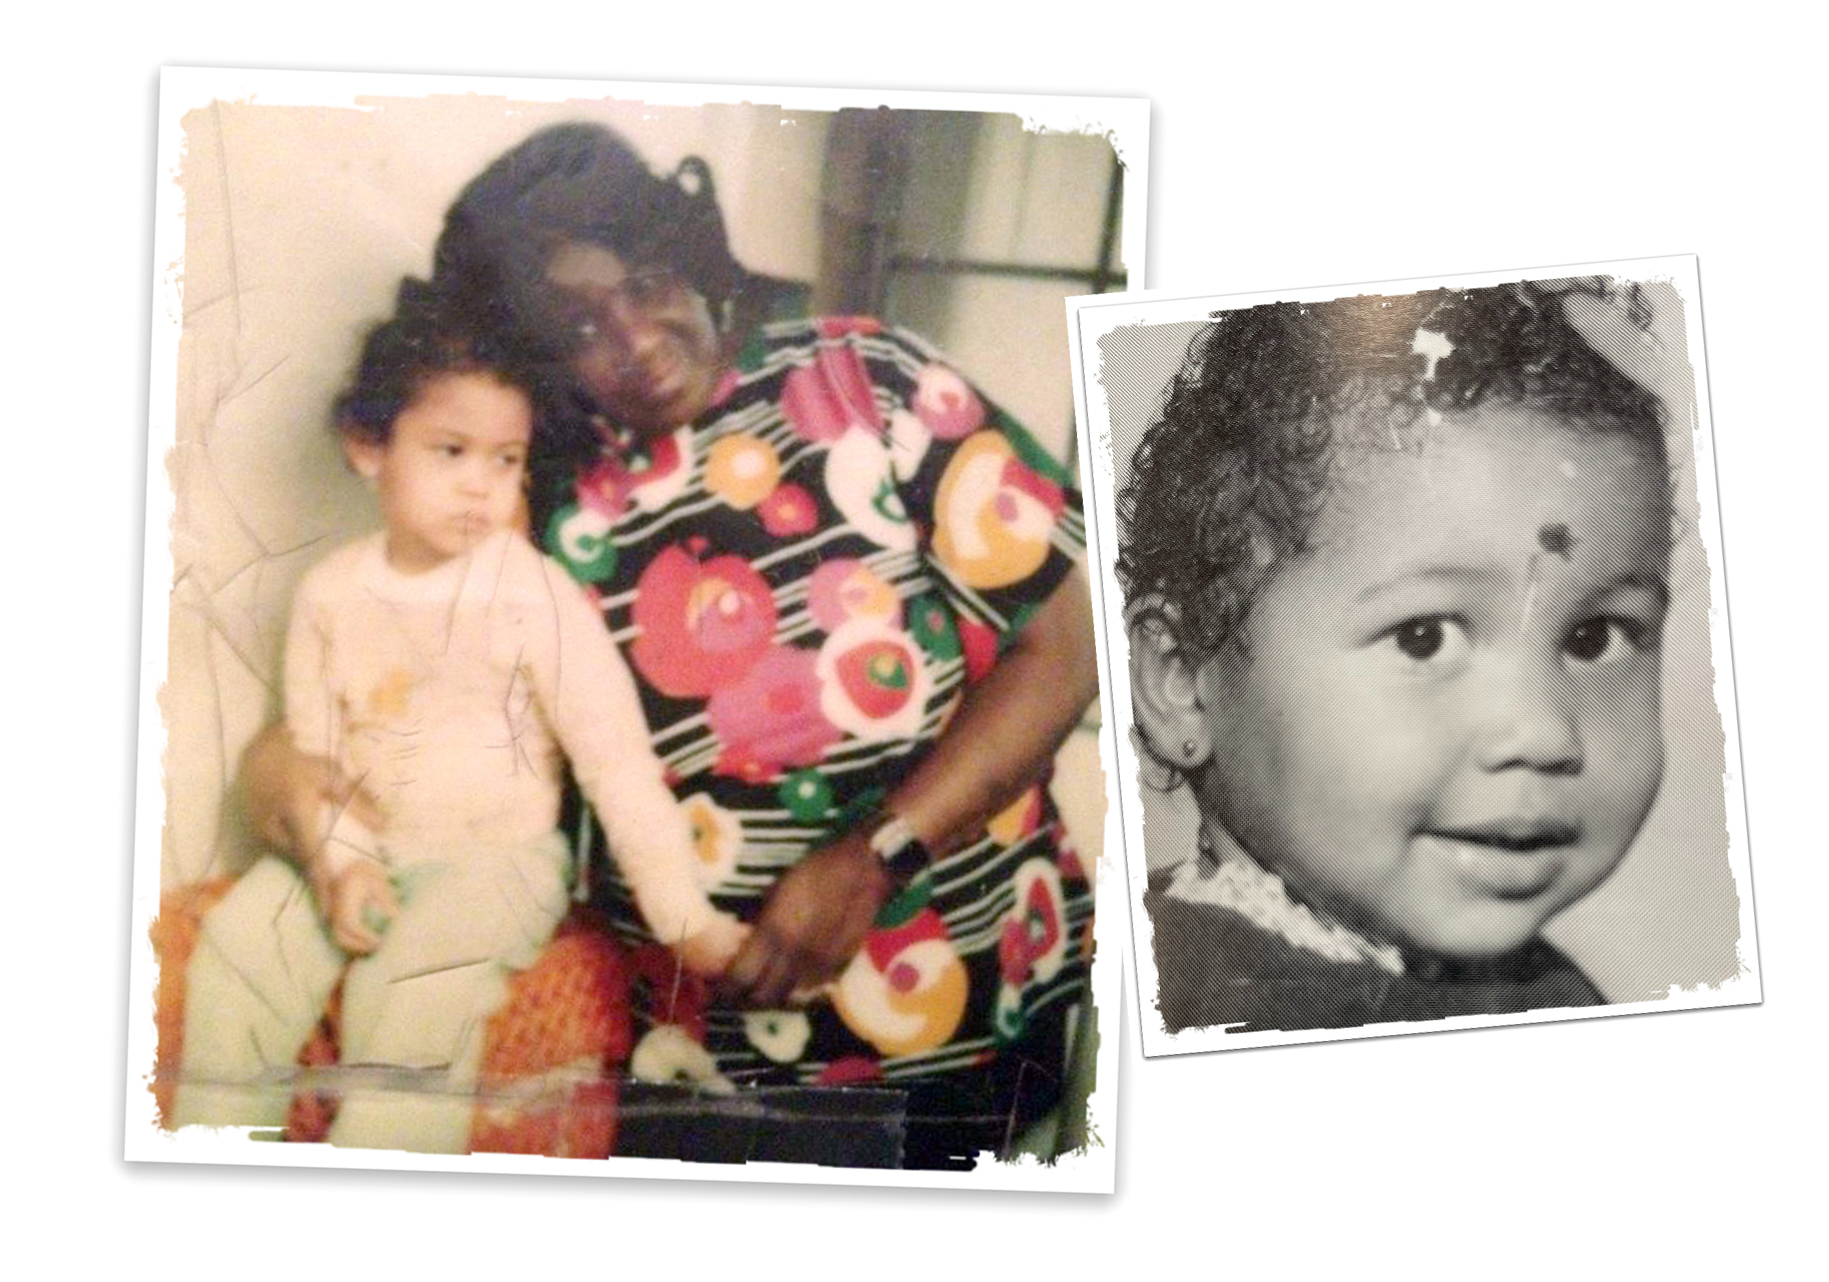 A composite image shows a picture of London Breed as a toddler with her grandmother, Comelia Brown, and a photo of London Breed as a baby that was published in the 1992 Galileo High School yearbook.